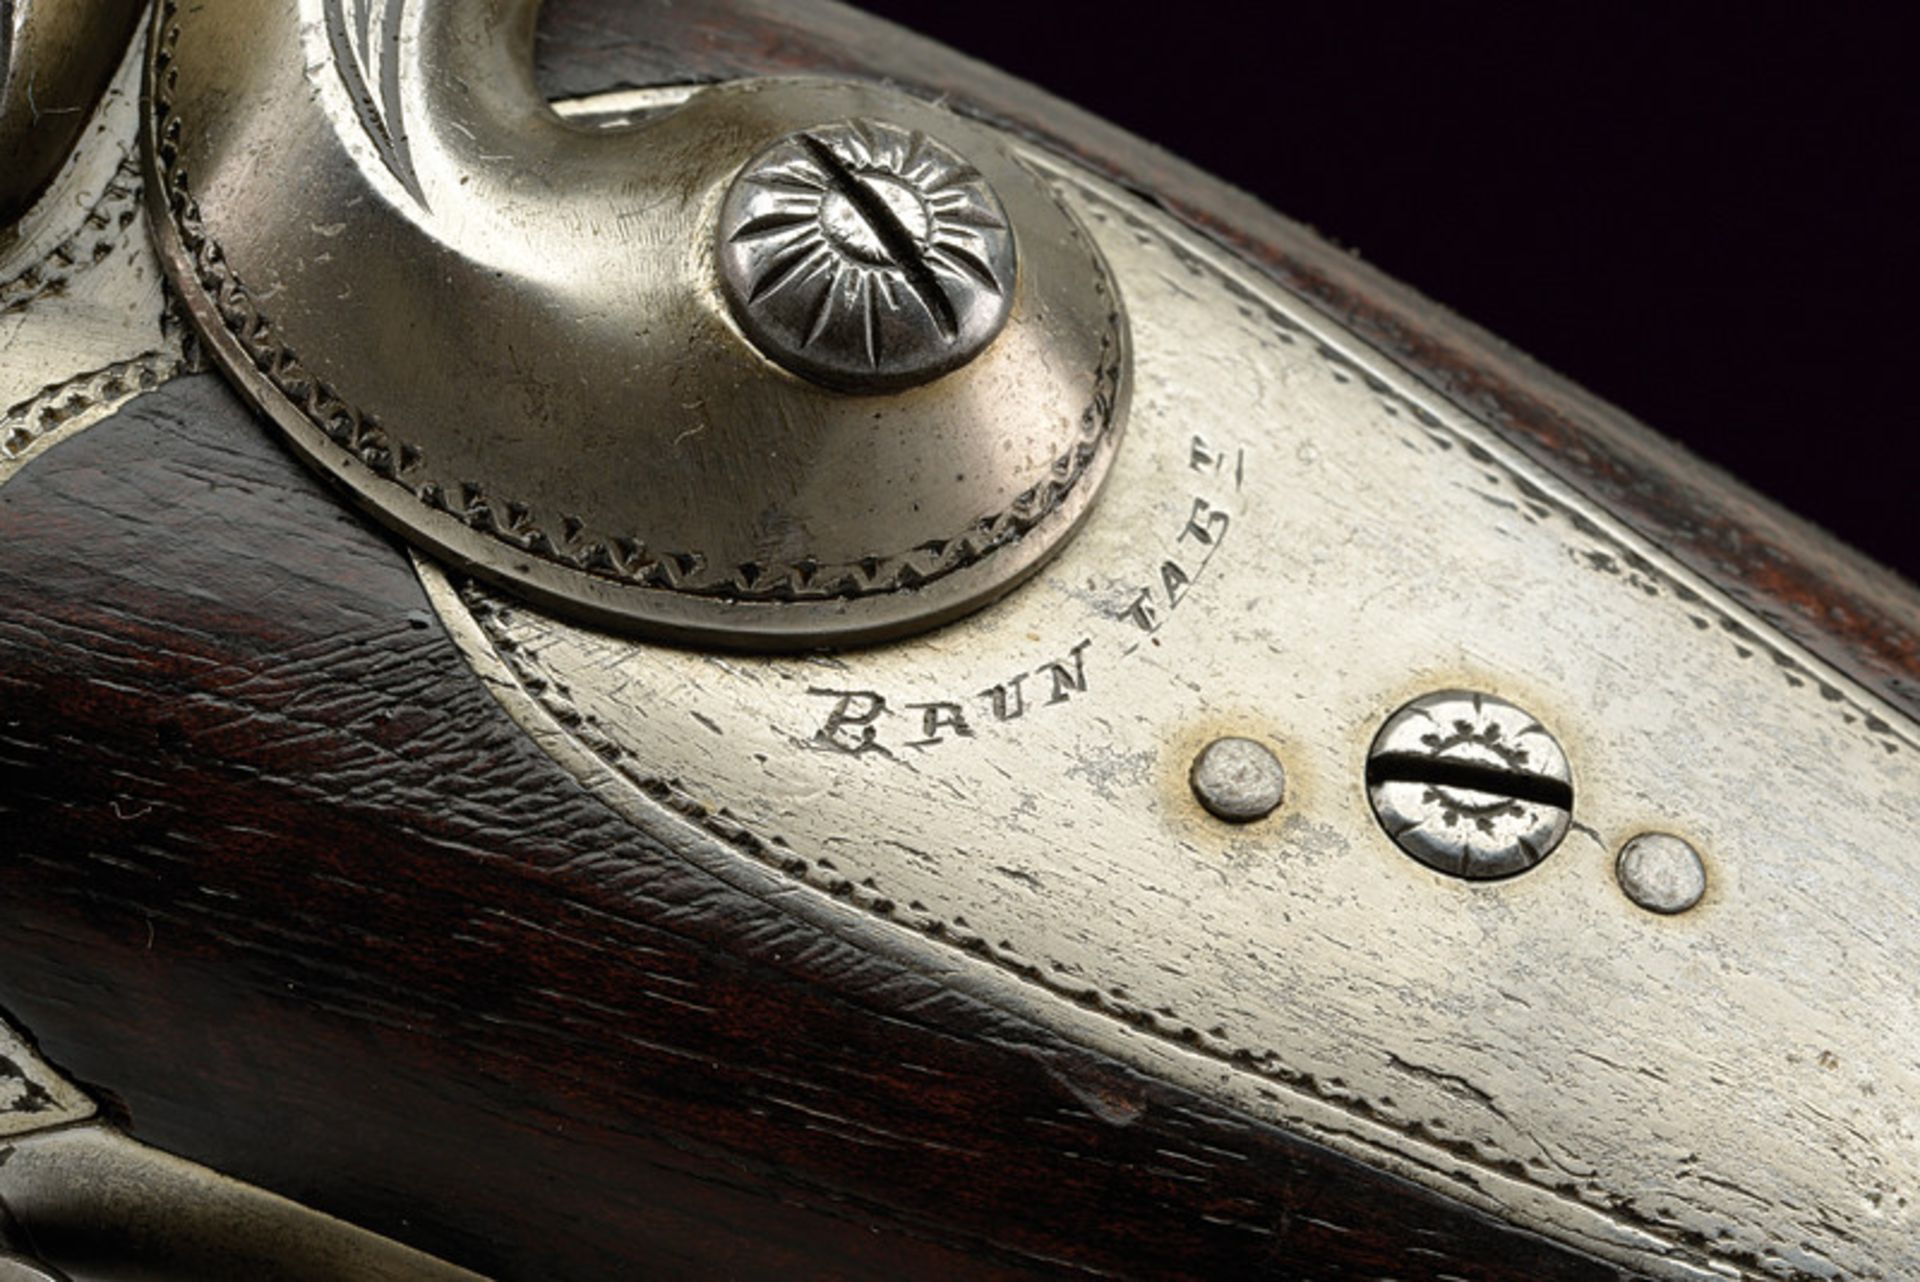 A double-barrelled pin-fire gun by Brun dating: third quarter of the 19th Century provenance: - Image 7 of 8